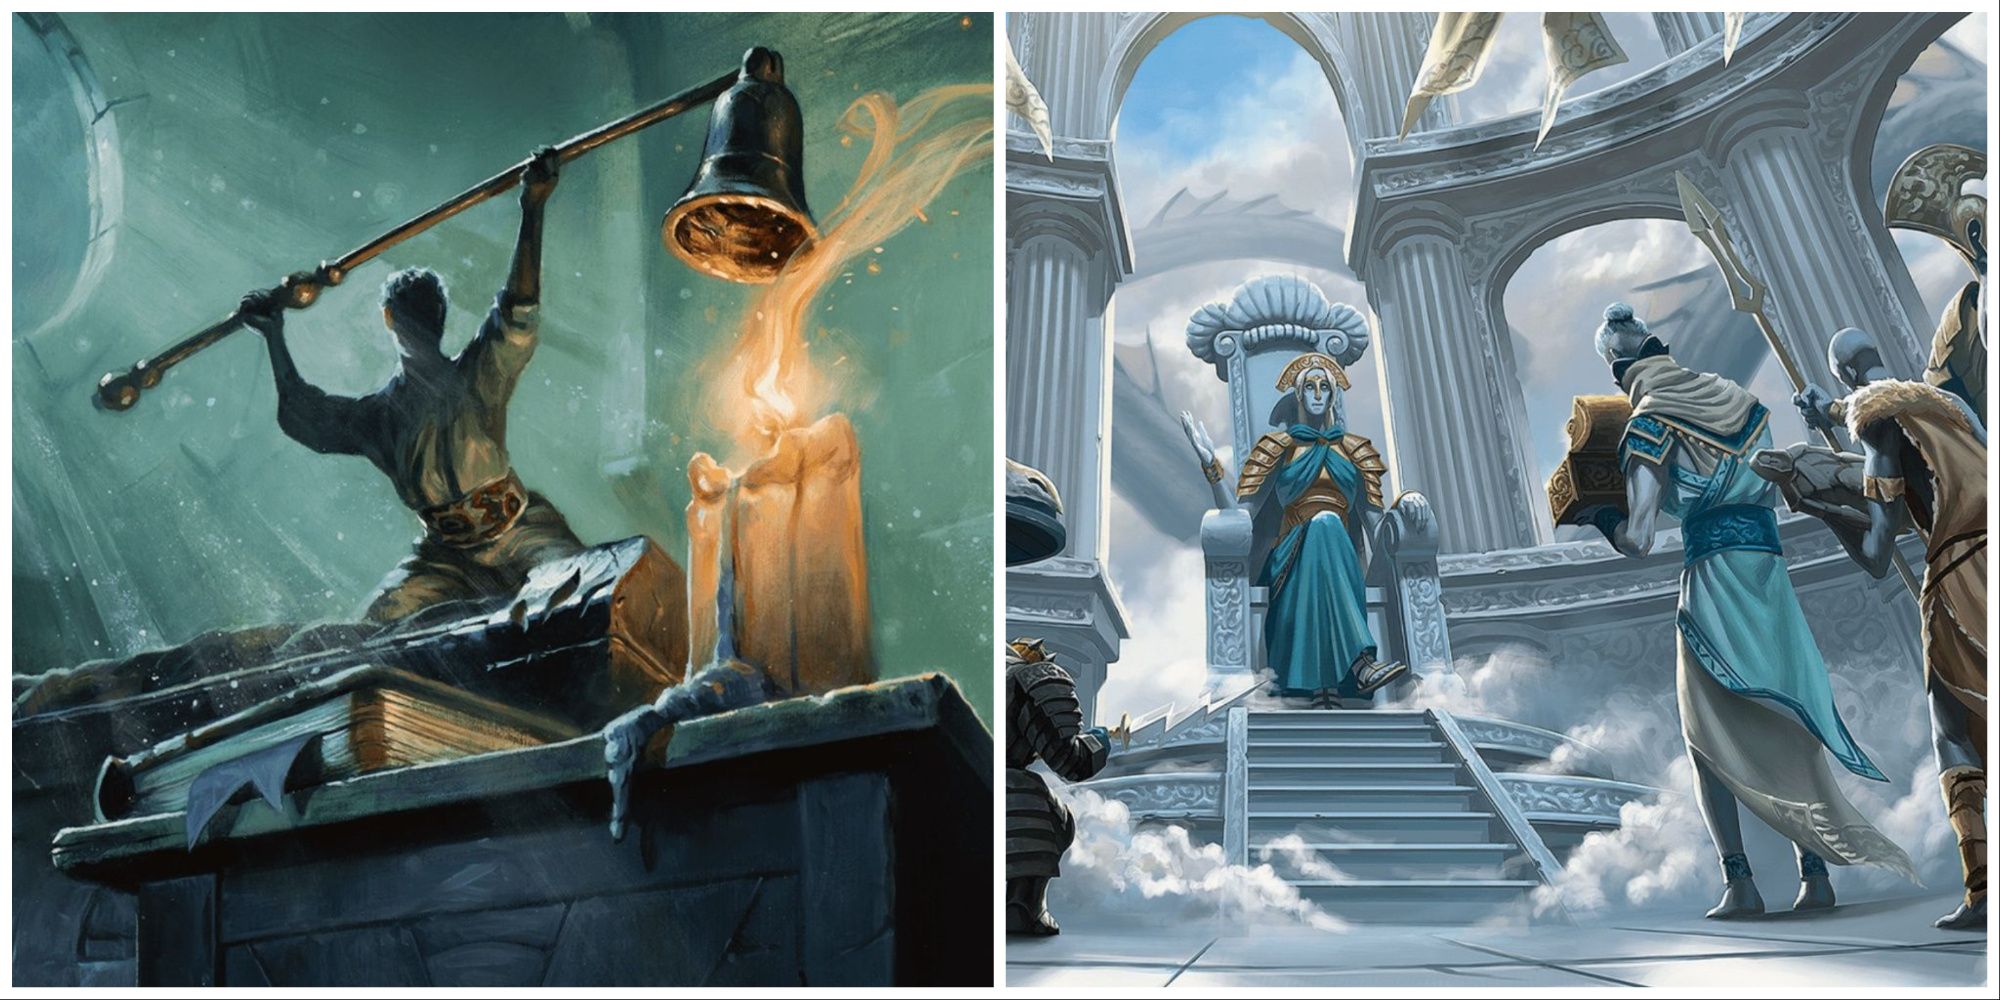 Left Image: A humanoid figure lifts a giant-sized candle snuffer above their head while standing on a giant-sized desk. Right image: A group of giants gathers in a Hellenistic style building in the sky.